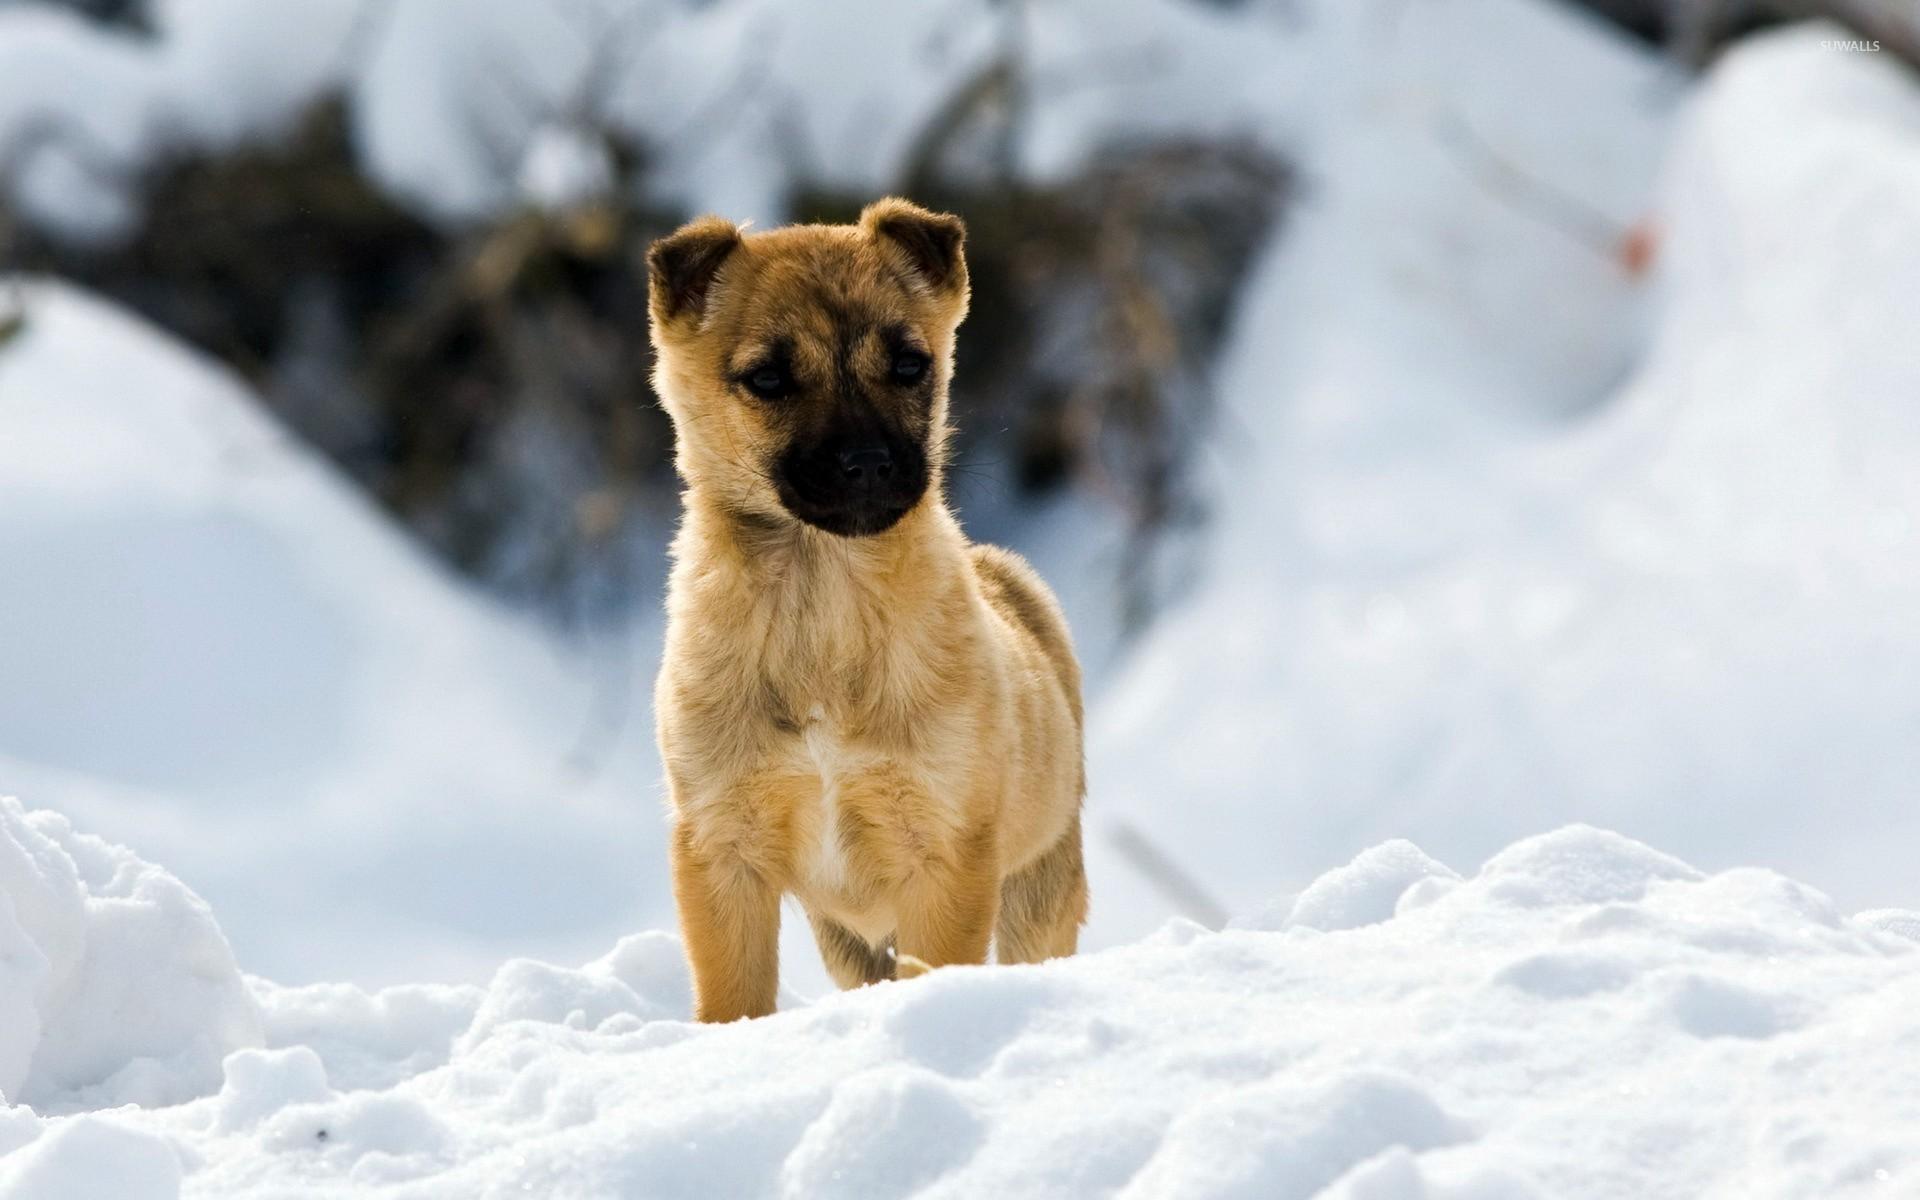 Puppy in the snow wallpaper wallpaper